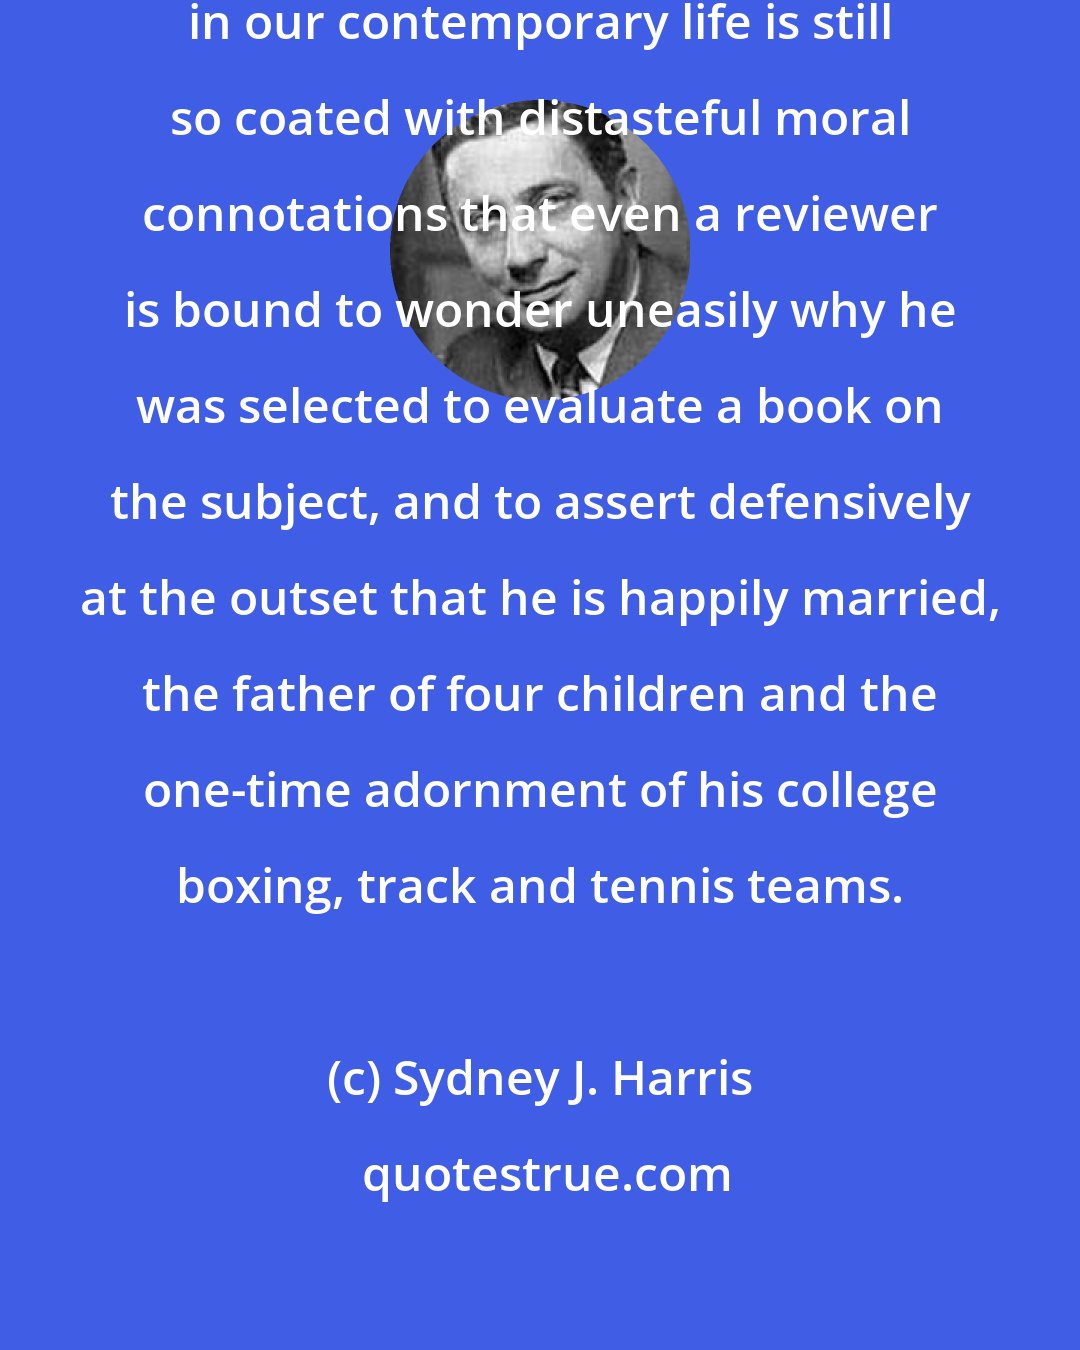 Sydney J. Harris: The public examination of homosexuality in our contemporary life is still so coated with distasteful moral connotations that even a reviewer is bound to wonder uneasily why he was selected to evaluate a book on the subject, and to assert defensively at the outset that he is happily married, the father of four children and the one-time adornment of his college boxing, track and tennis teams.